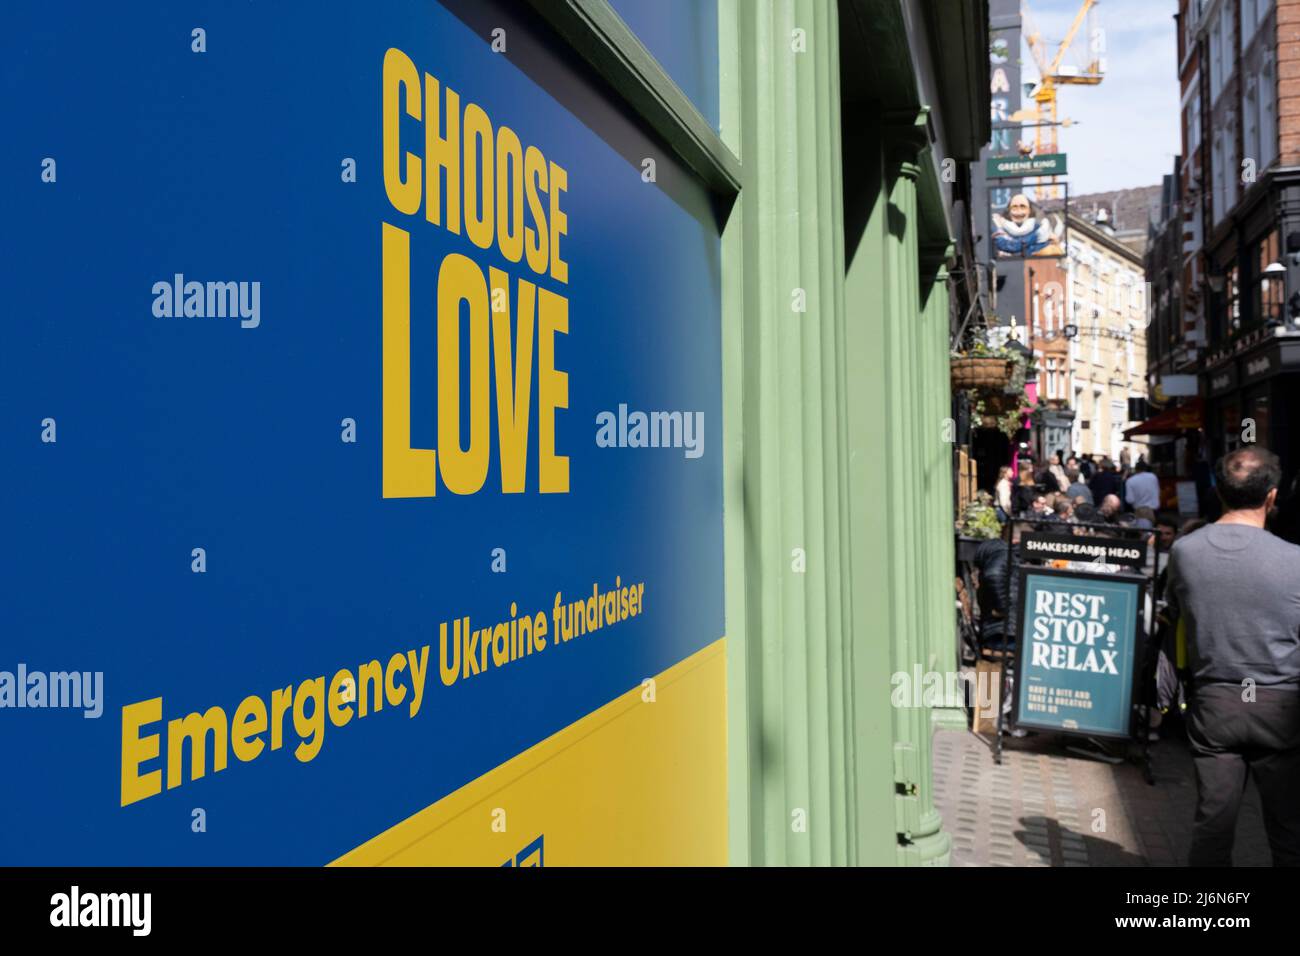 Choose love, emergency Ukraine fundraiser sign in an empty shop space on 11th April 2022 in London, United Kingdom. Stock Photo